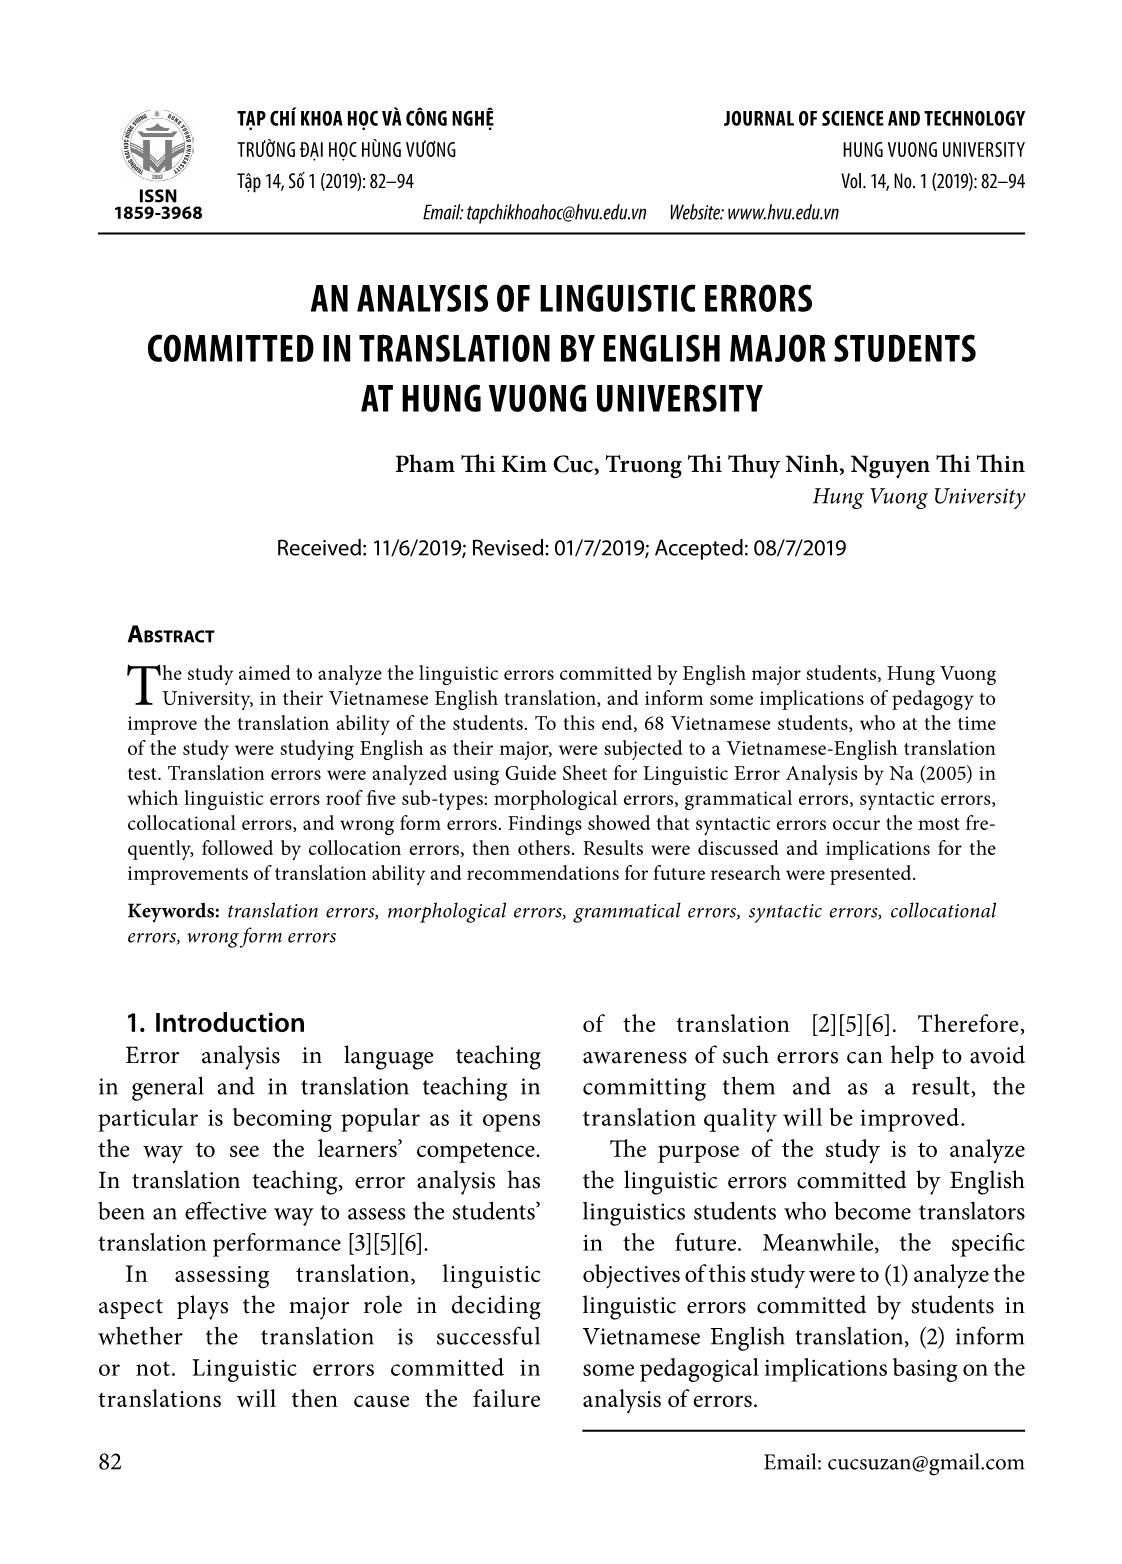 An analysis of linguistic errors committed in translation by English major students at hung vuong university trang 1